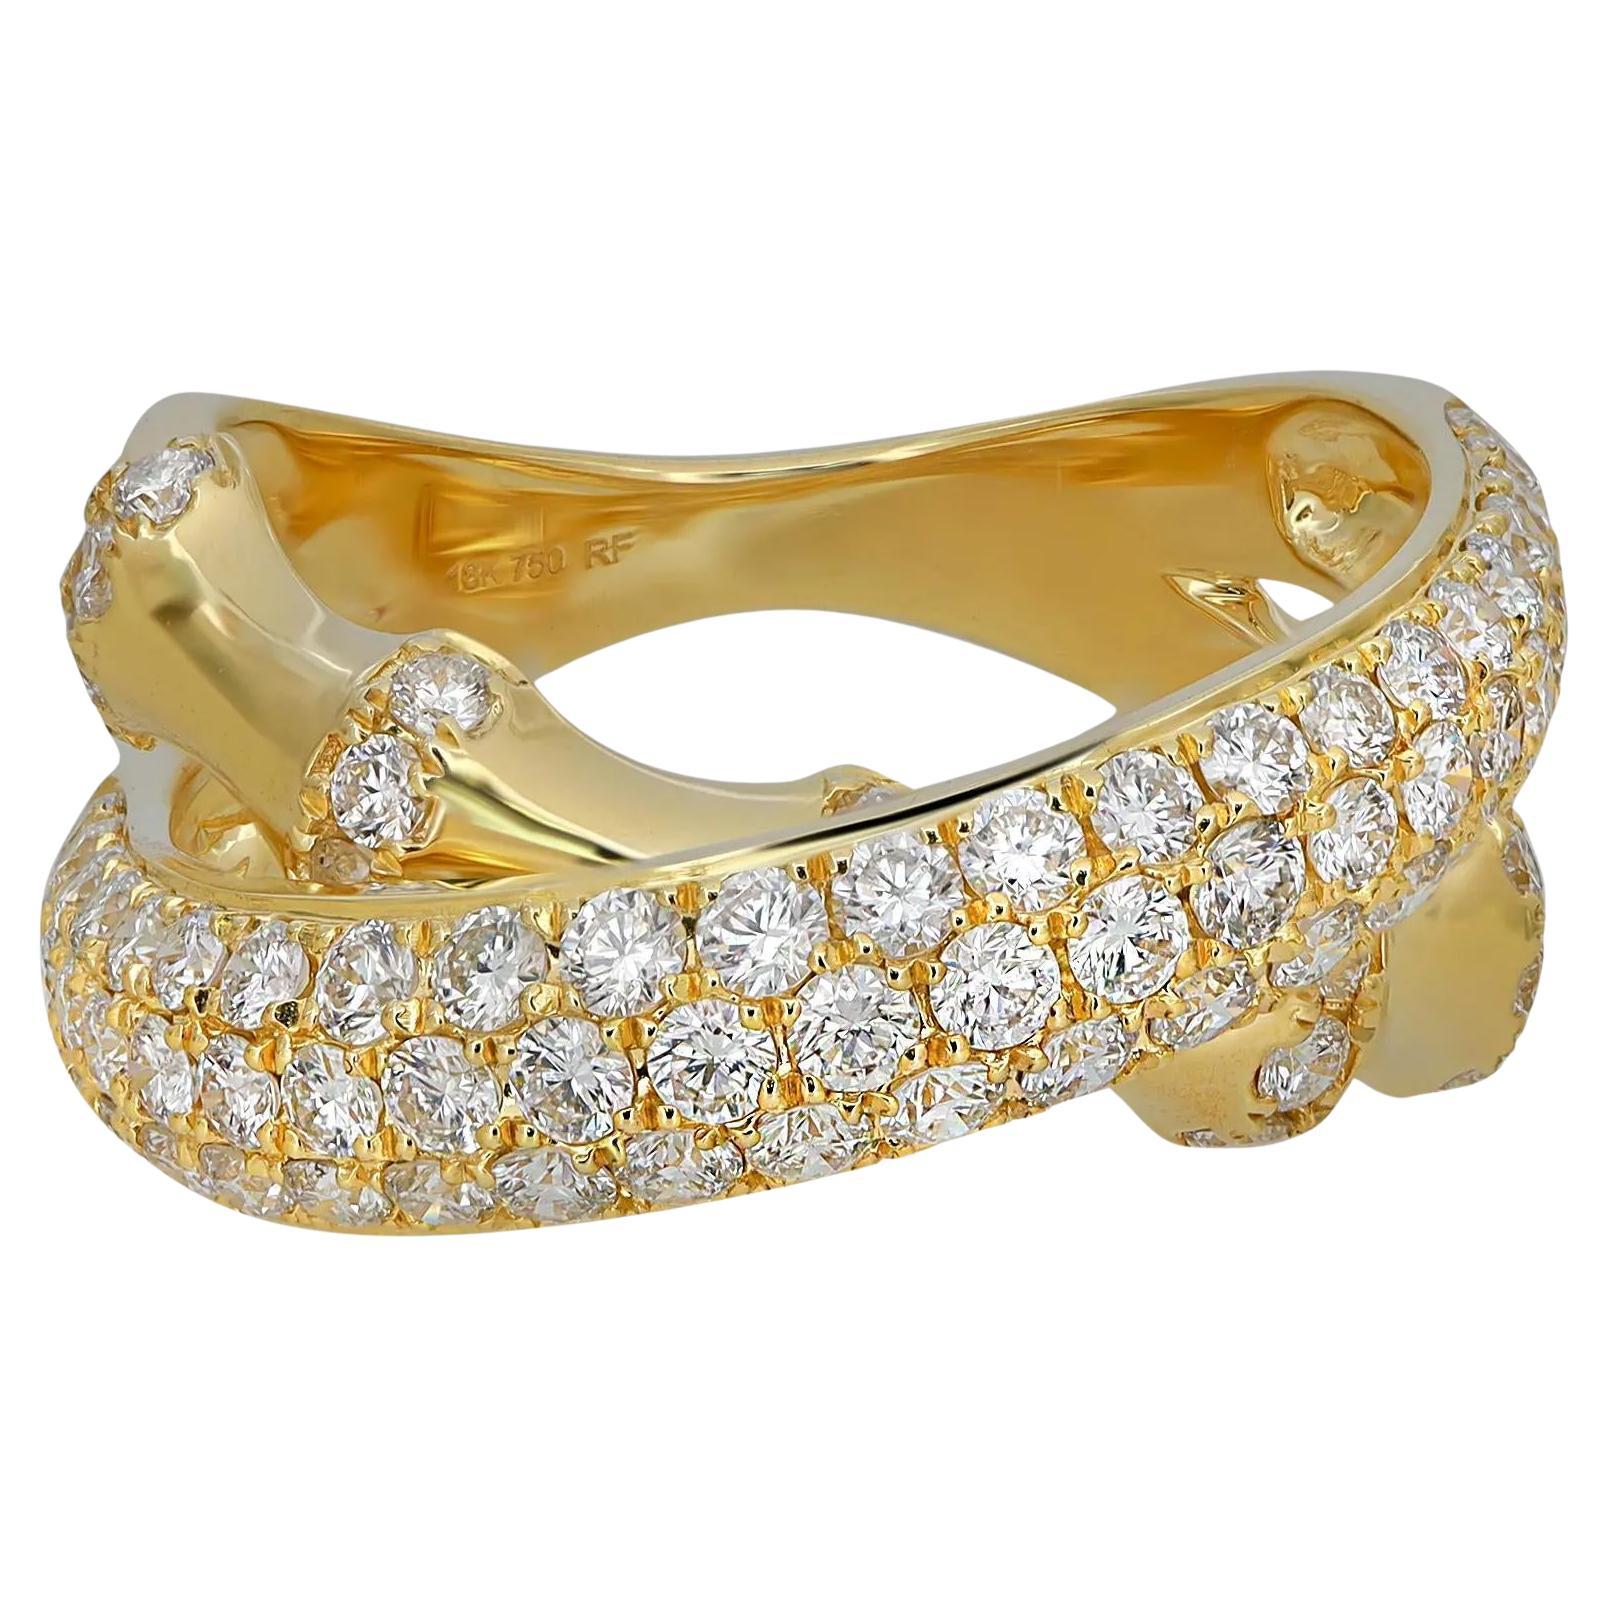 Pave Set Round Cut Diamond Crossover Band Ring 18K Yellow Gold 1.71Ctw Size 6.5